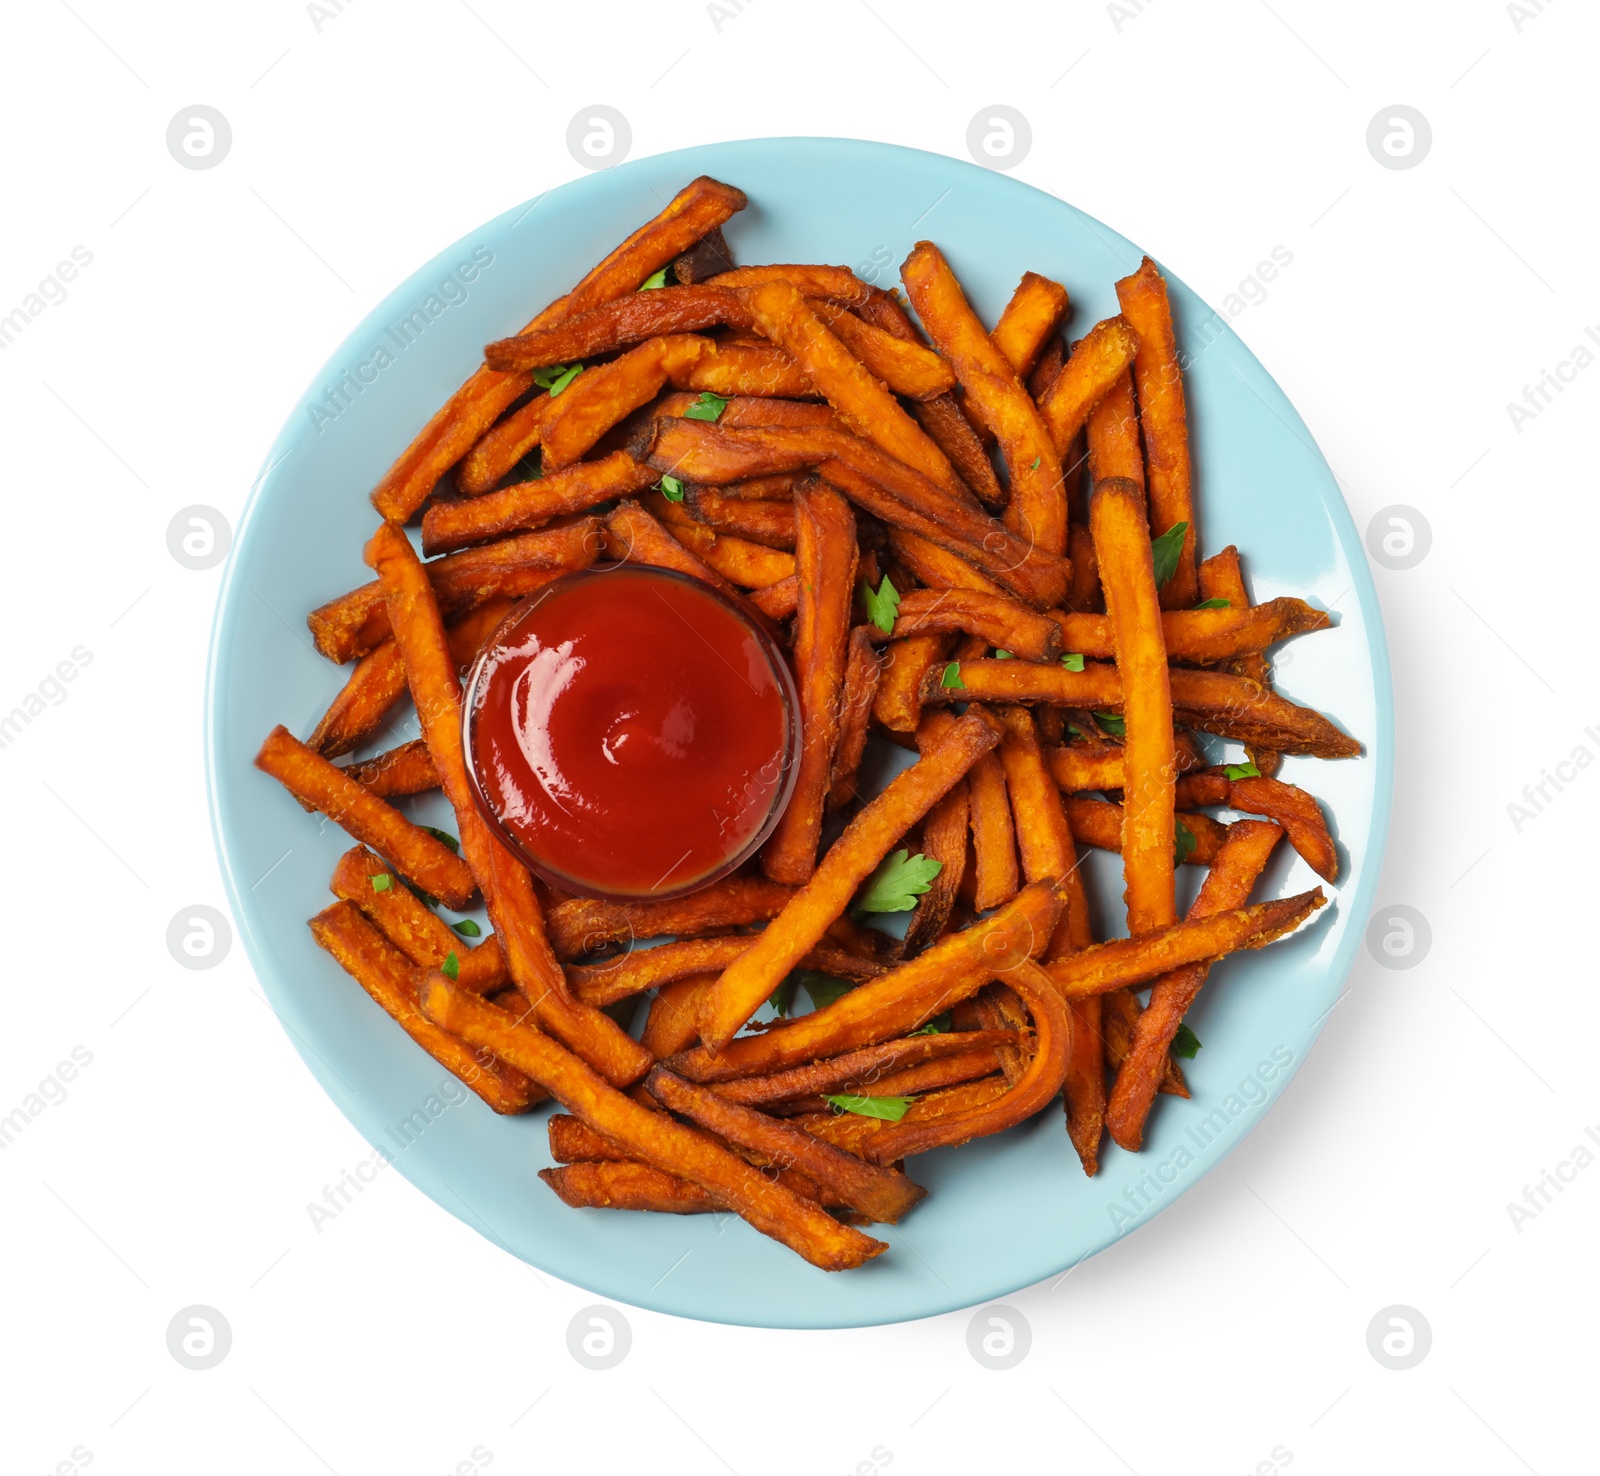 Photo of Plate with delicious sweet potato fries and sauce on white background, top view